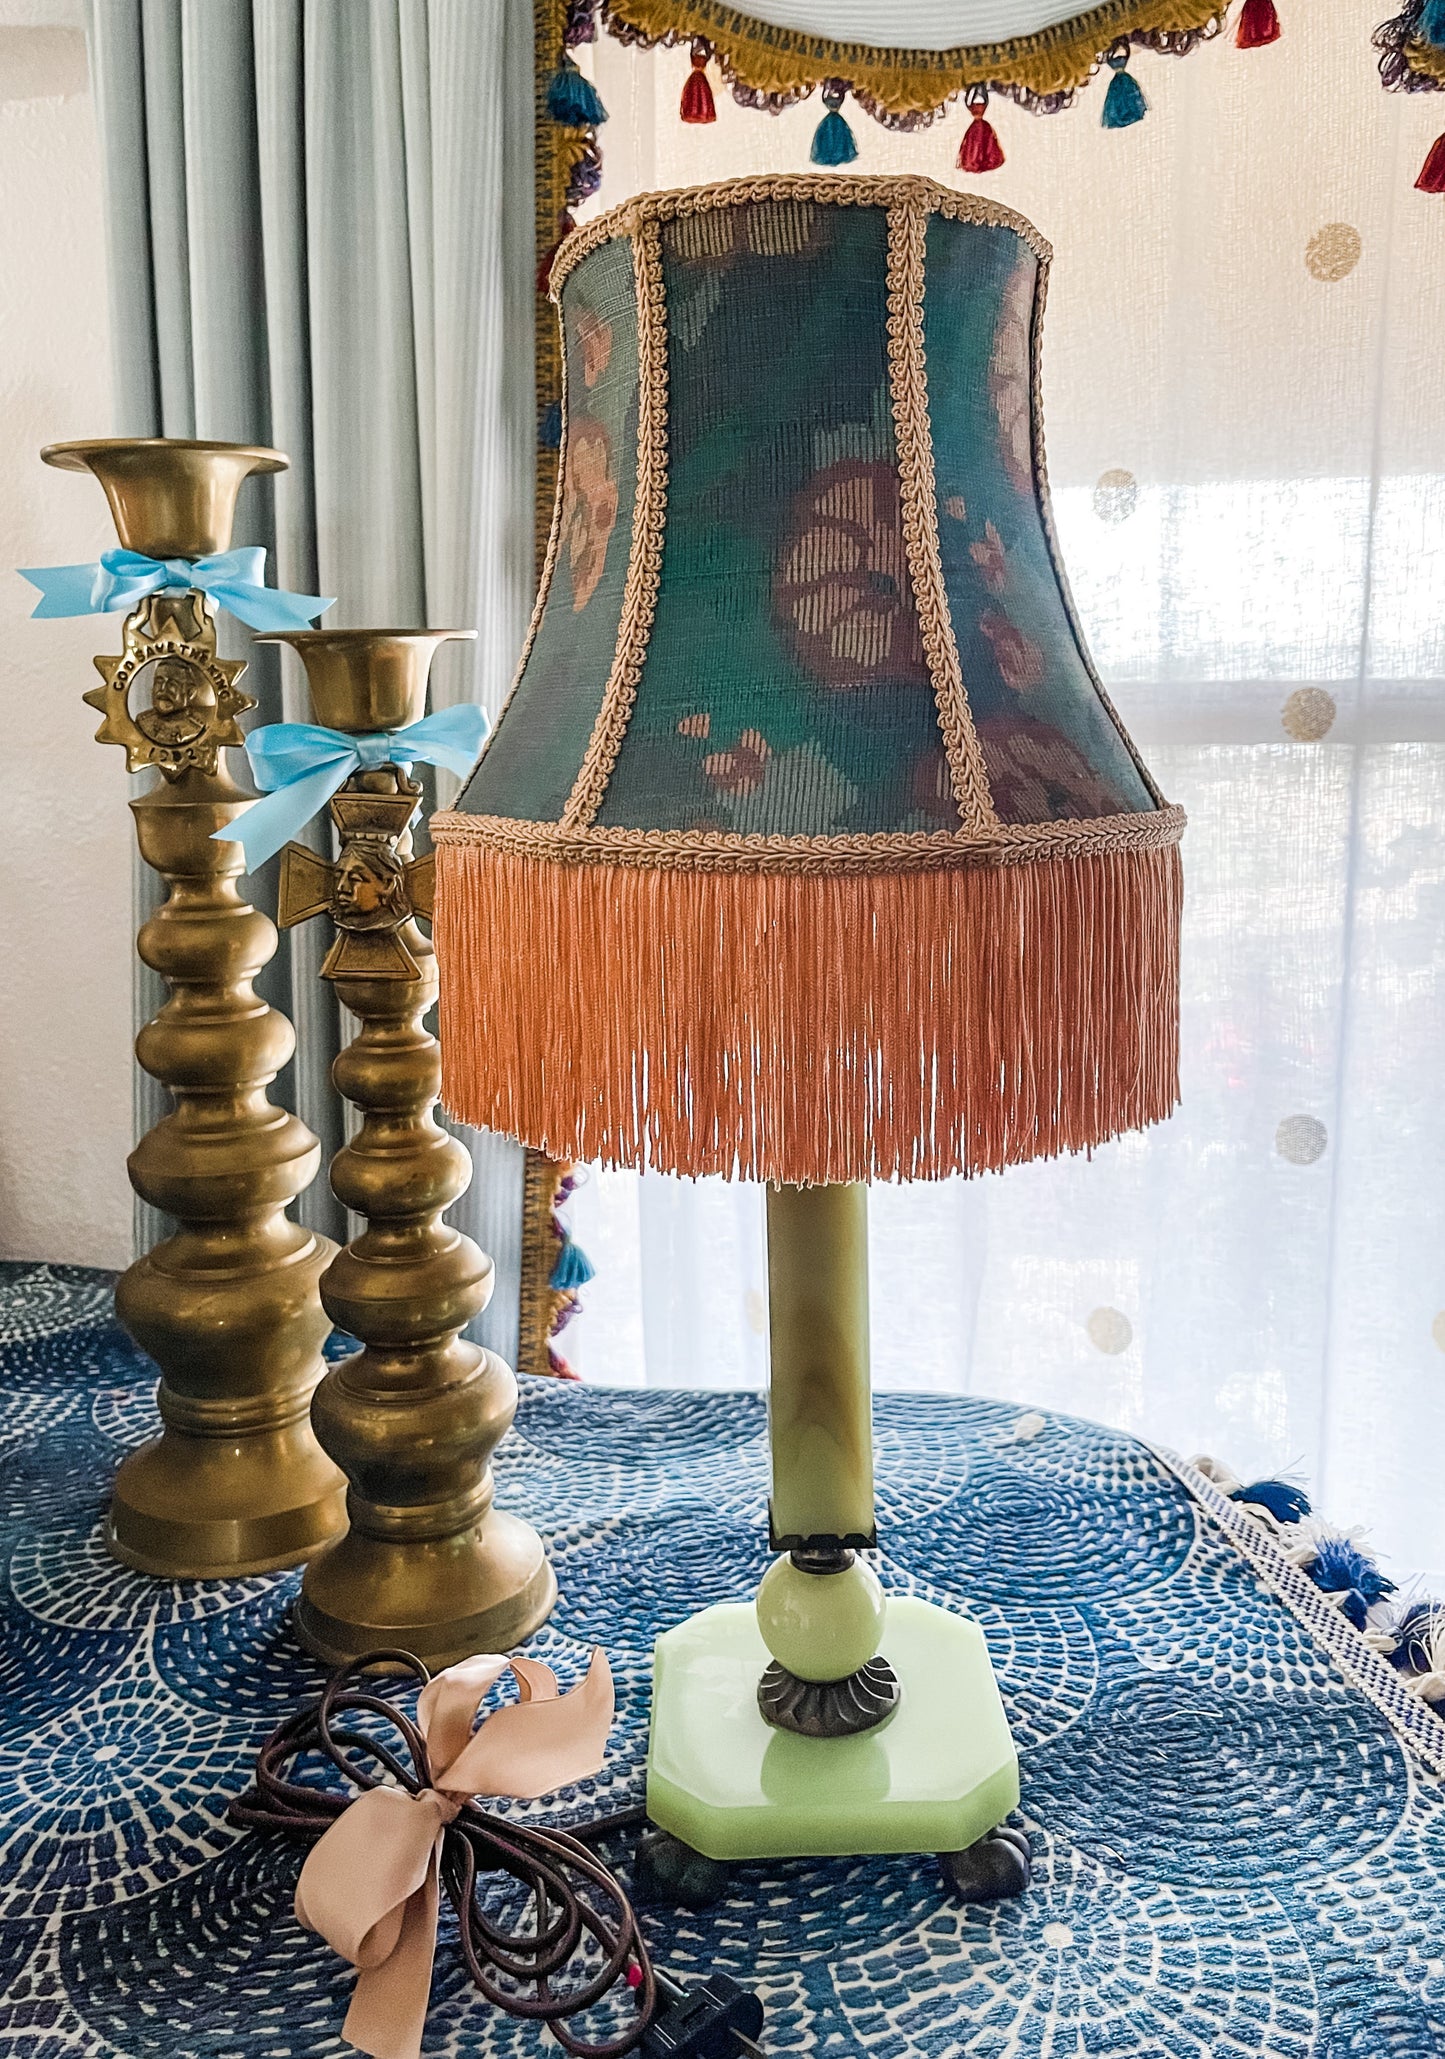 Antique Jadeite Lamp with Floral Fringed Shade, Bronze Claw Feet, and Adornments